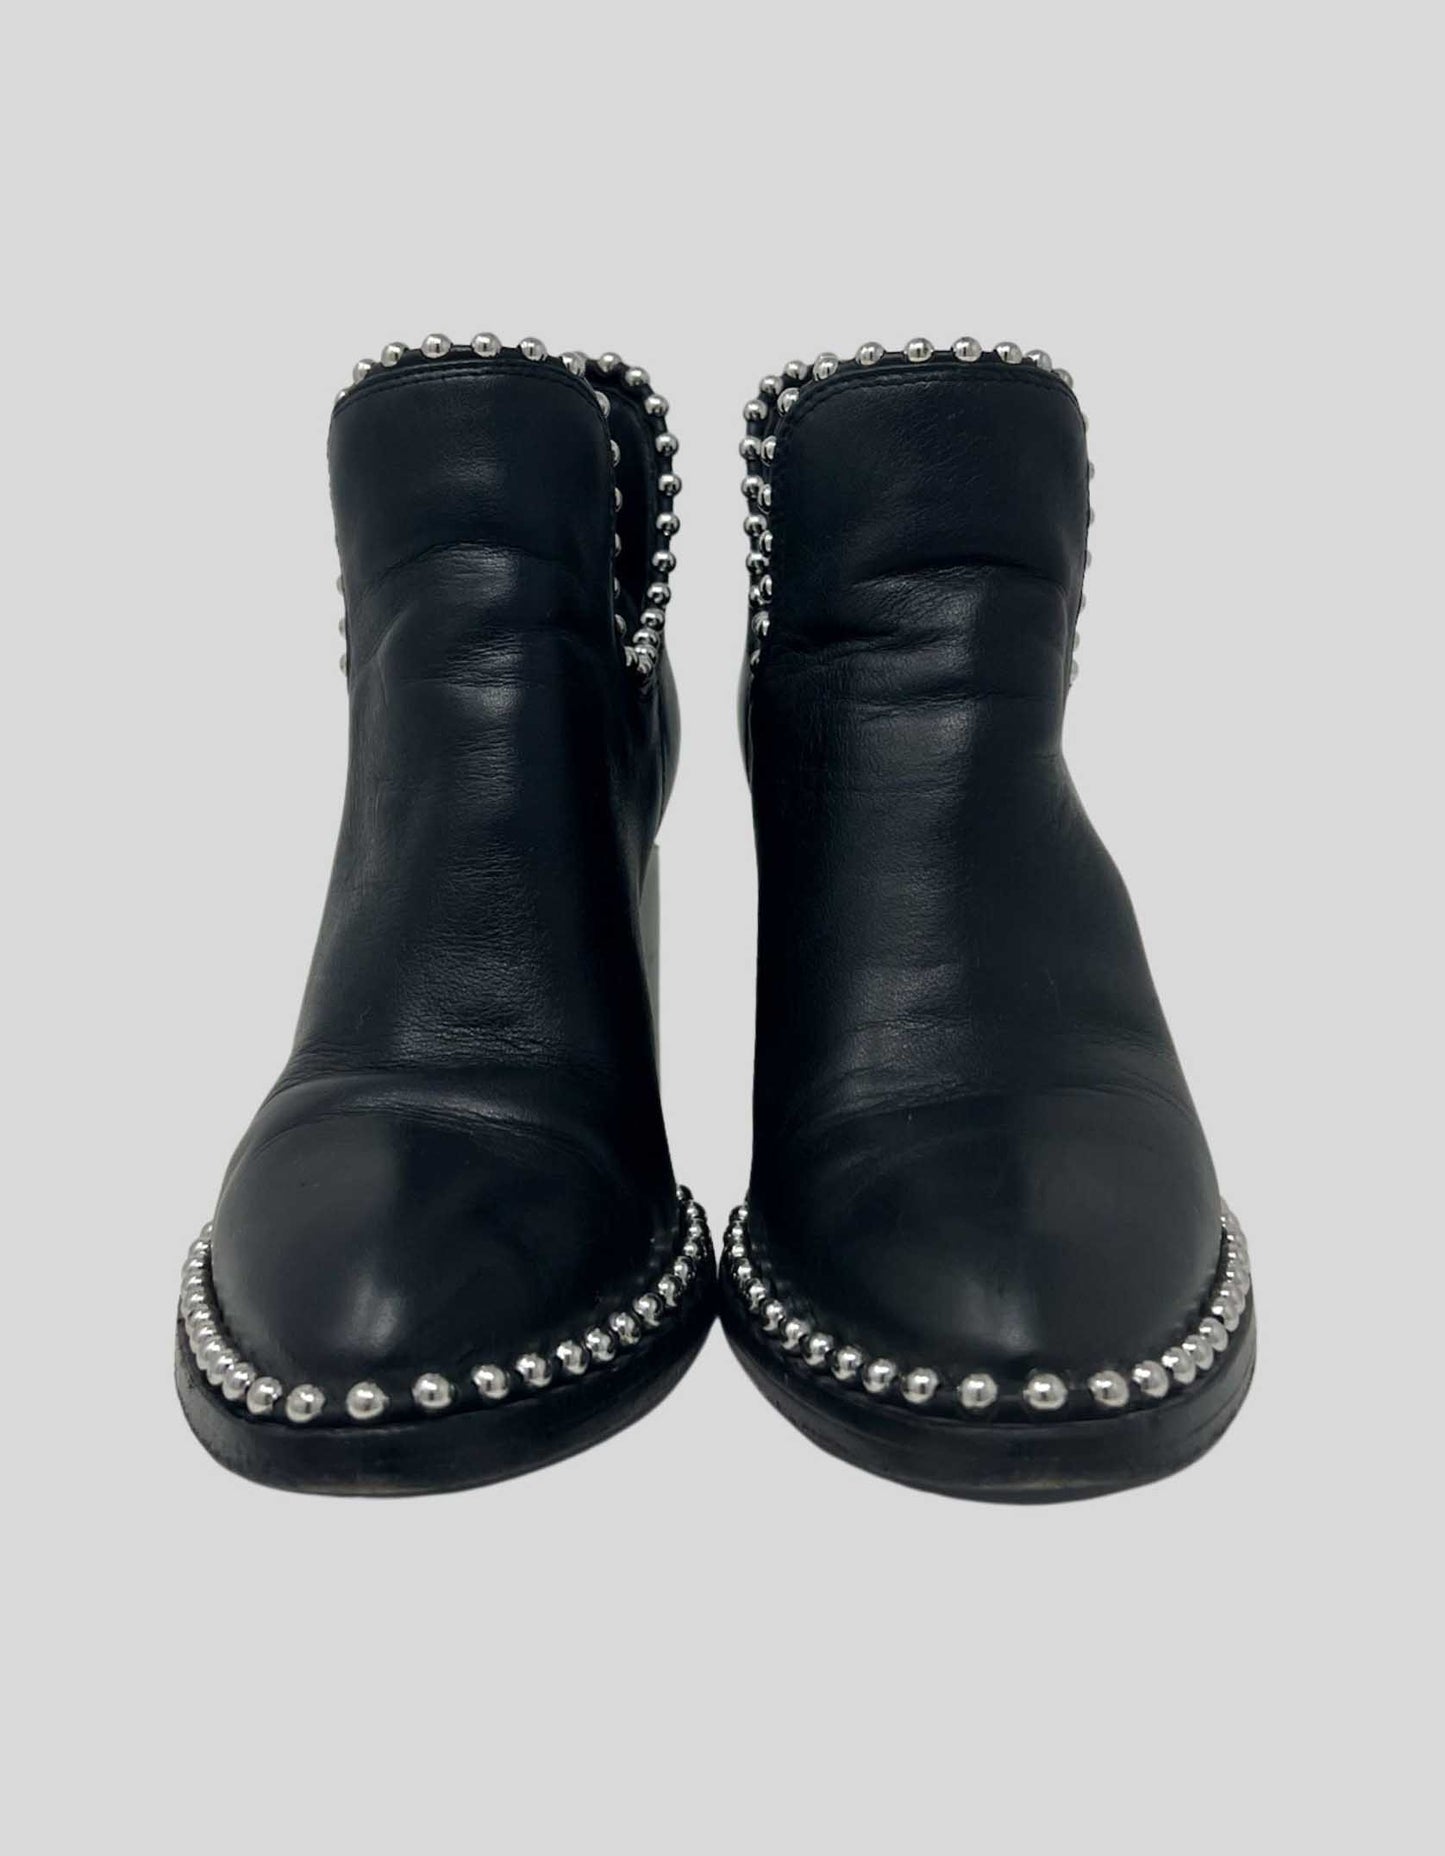 ALEXANDER WANG Leather Studded Accent Combat Boots - 37 IT | 7 US